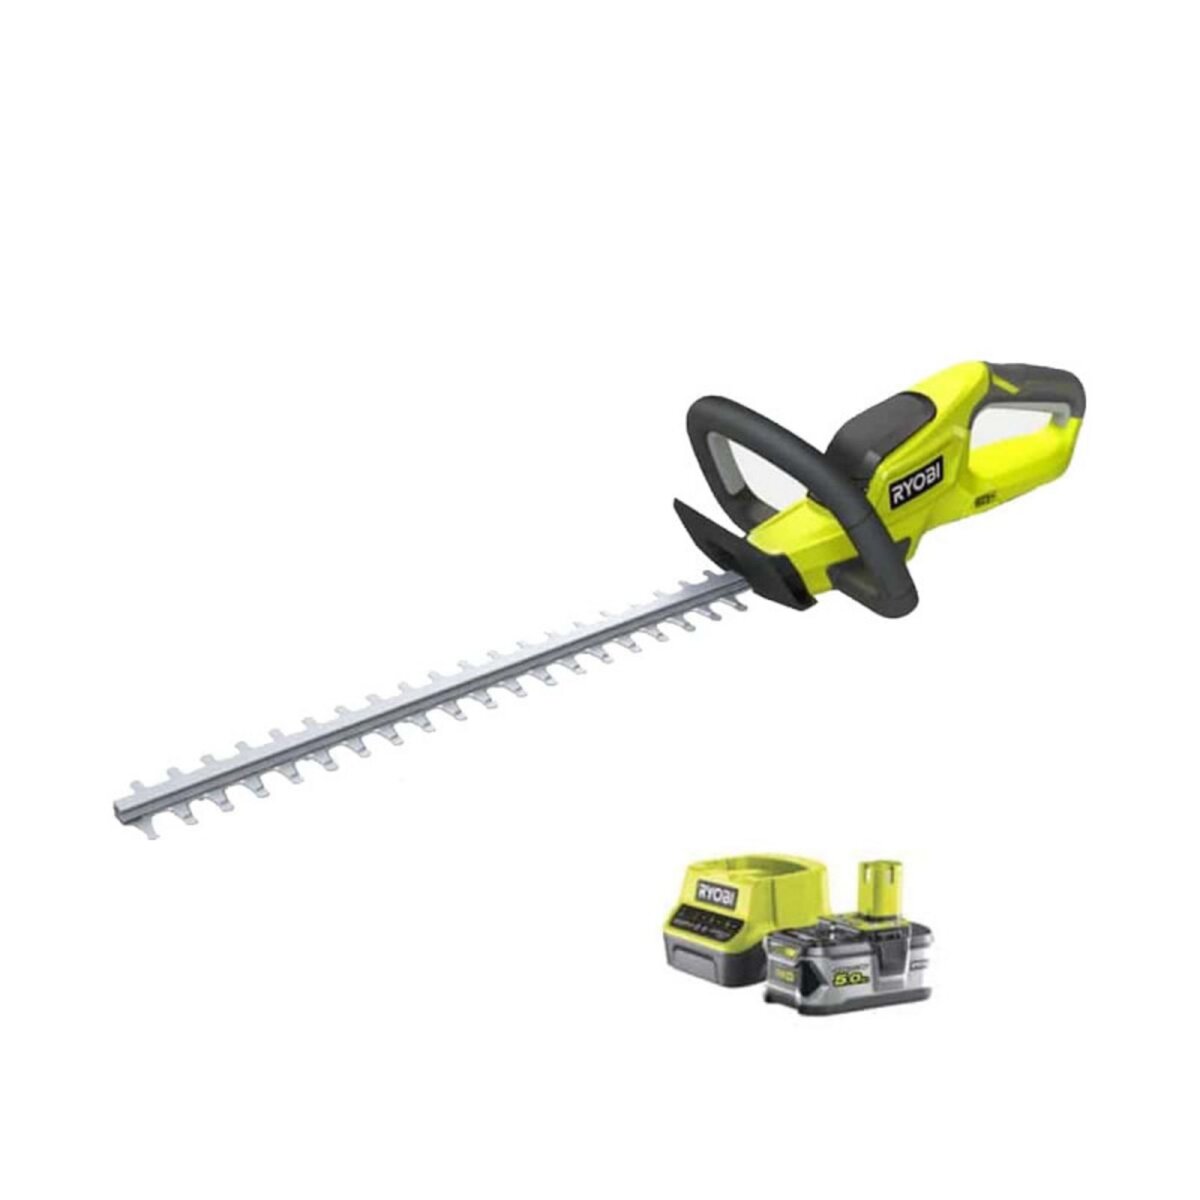 Ryobi Pack RYOBI Taille-haies 18V One+ OHT1845 - 1 batterie 5.0Ah - 1 chargeur rapide 2.0Ah RC18120-150